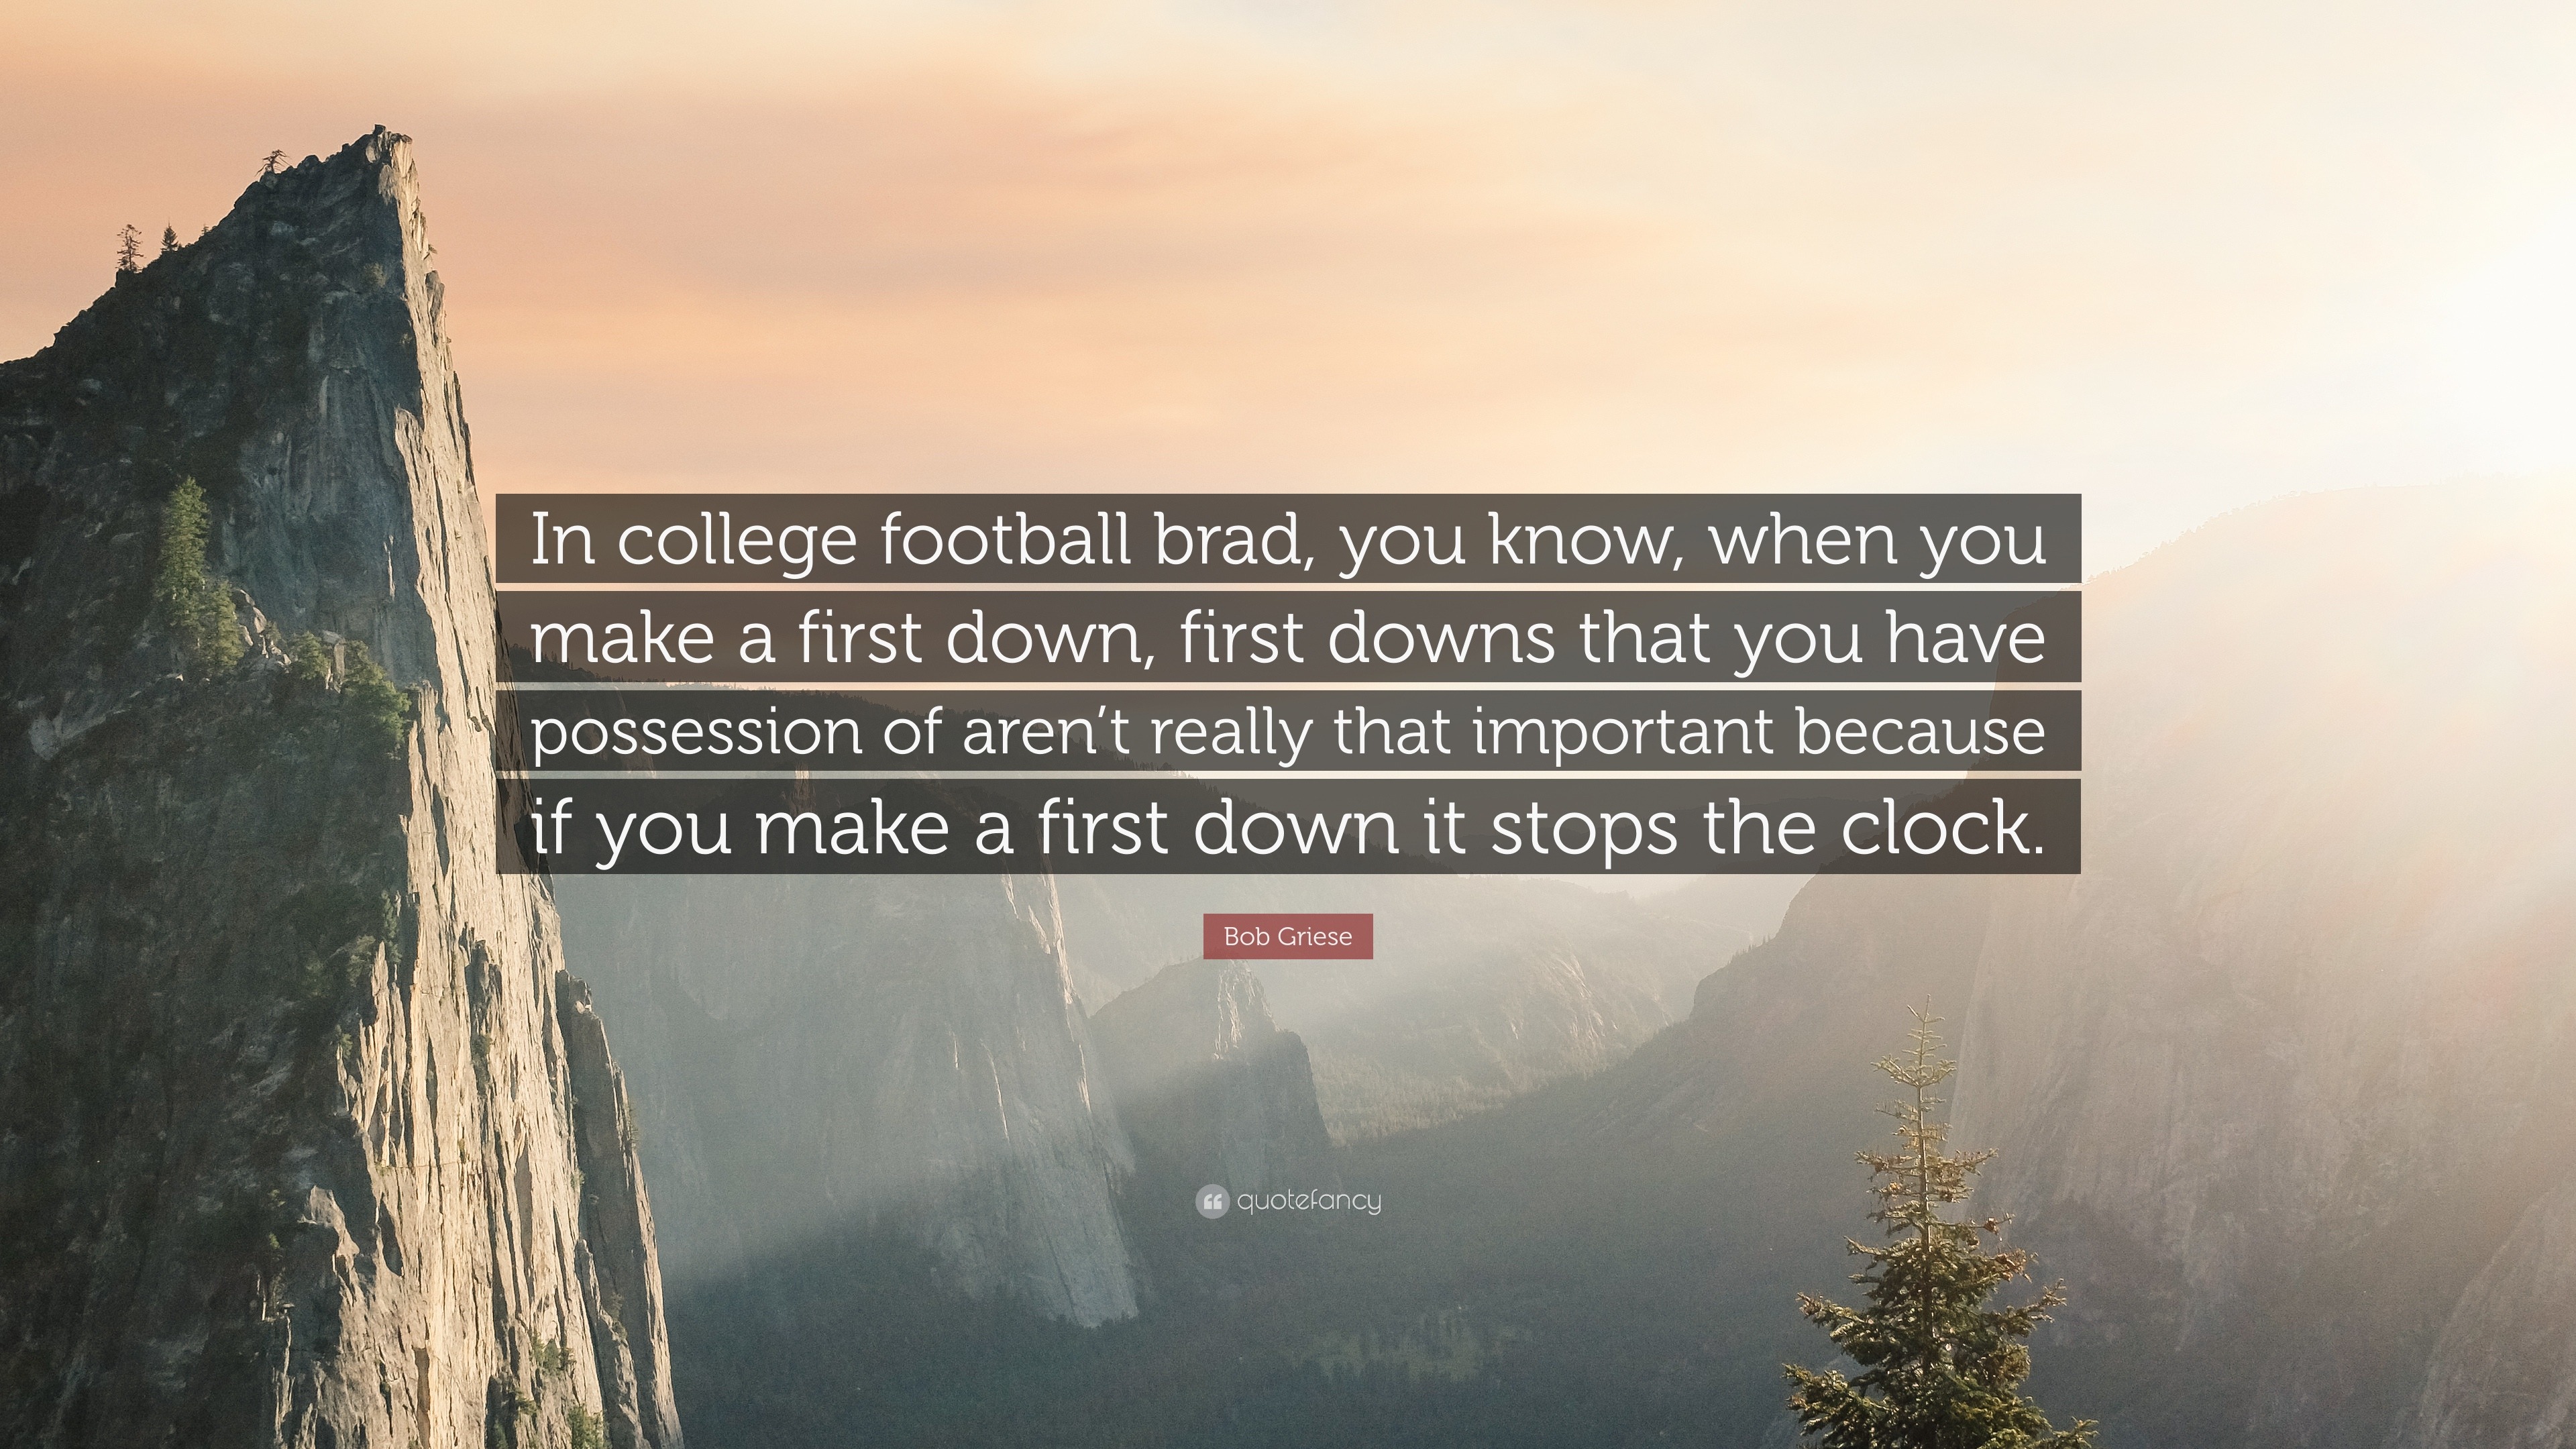 Bob Griese Quote: “In college football brad, you know, when you